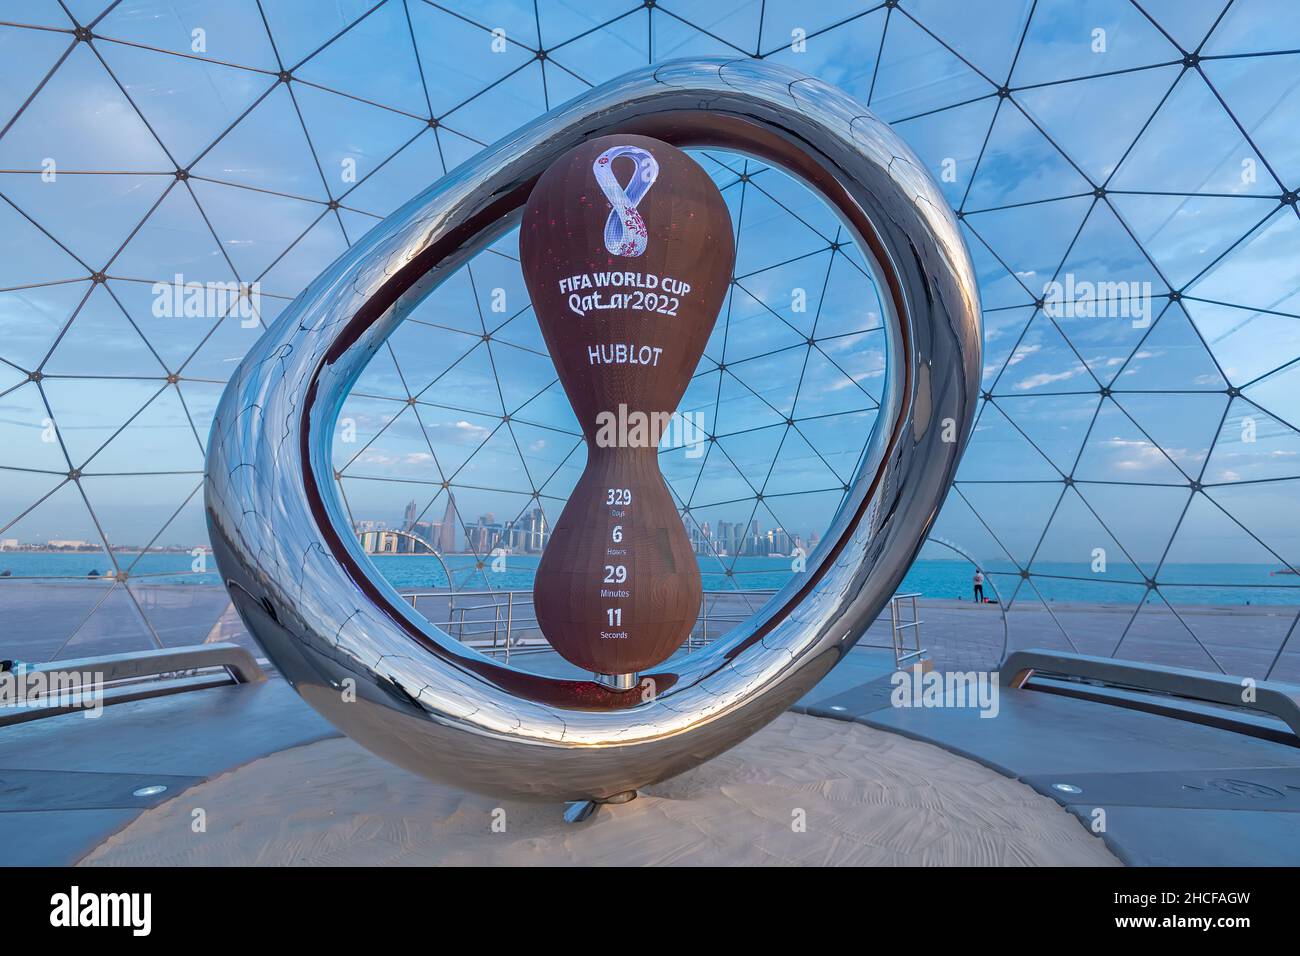 FIFA World Cup Qatar 2022 Official Countdown Clock unveiled with one year to go Stock Photo